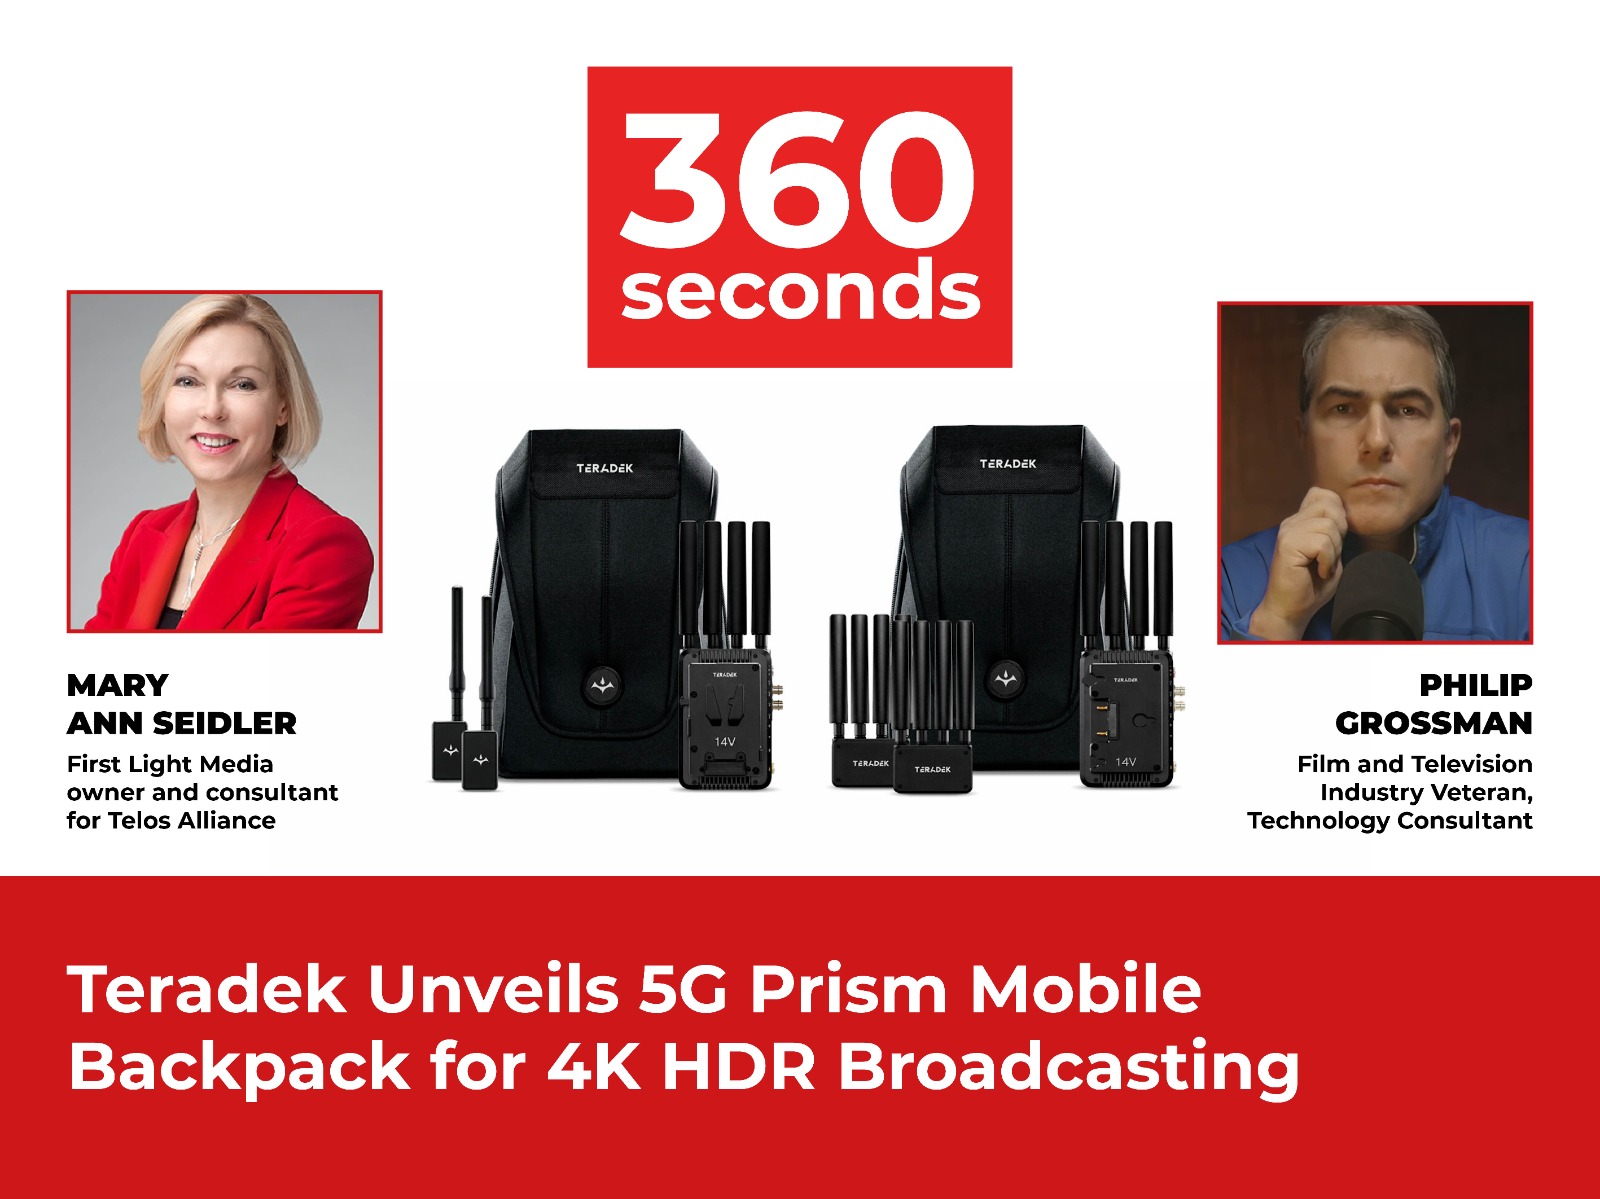 Teradek in «360 Seconds. Broadcast News and Commentary» tkt1957.com